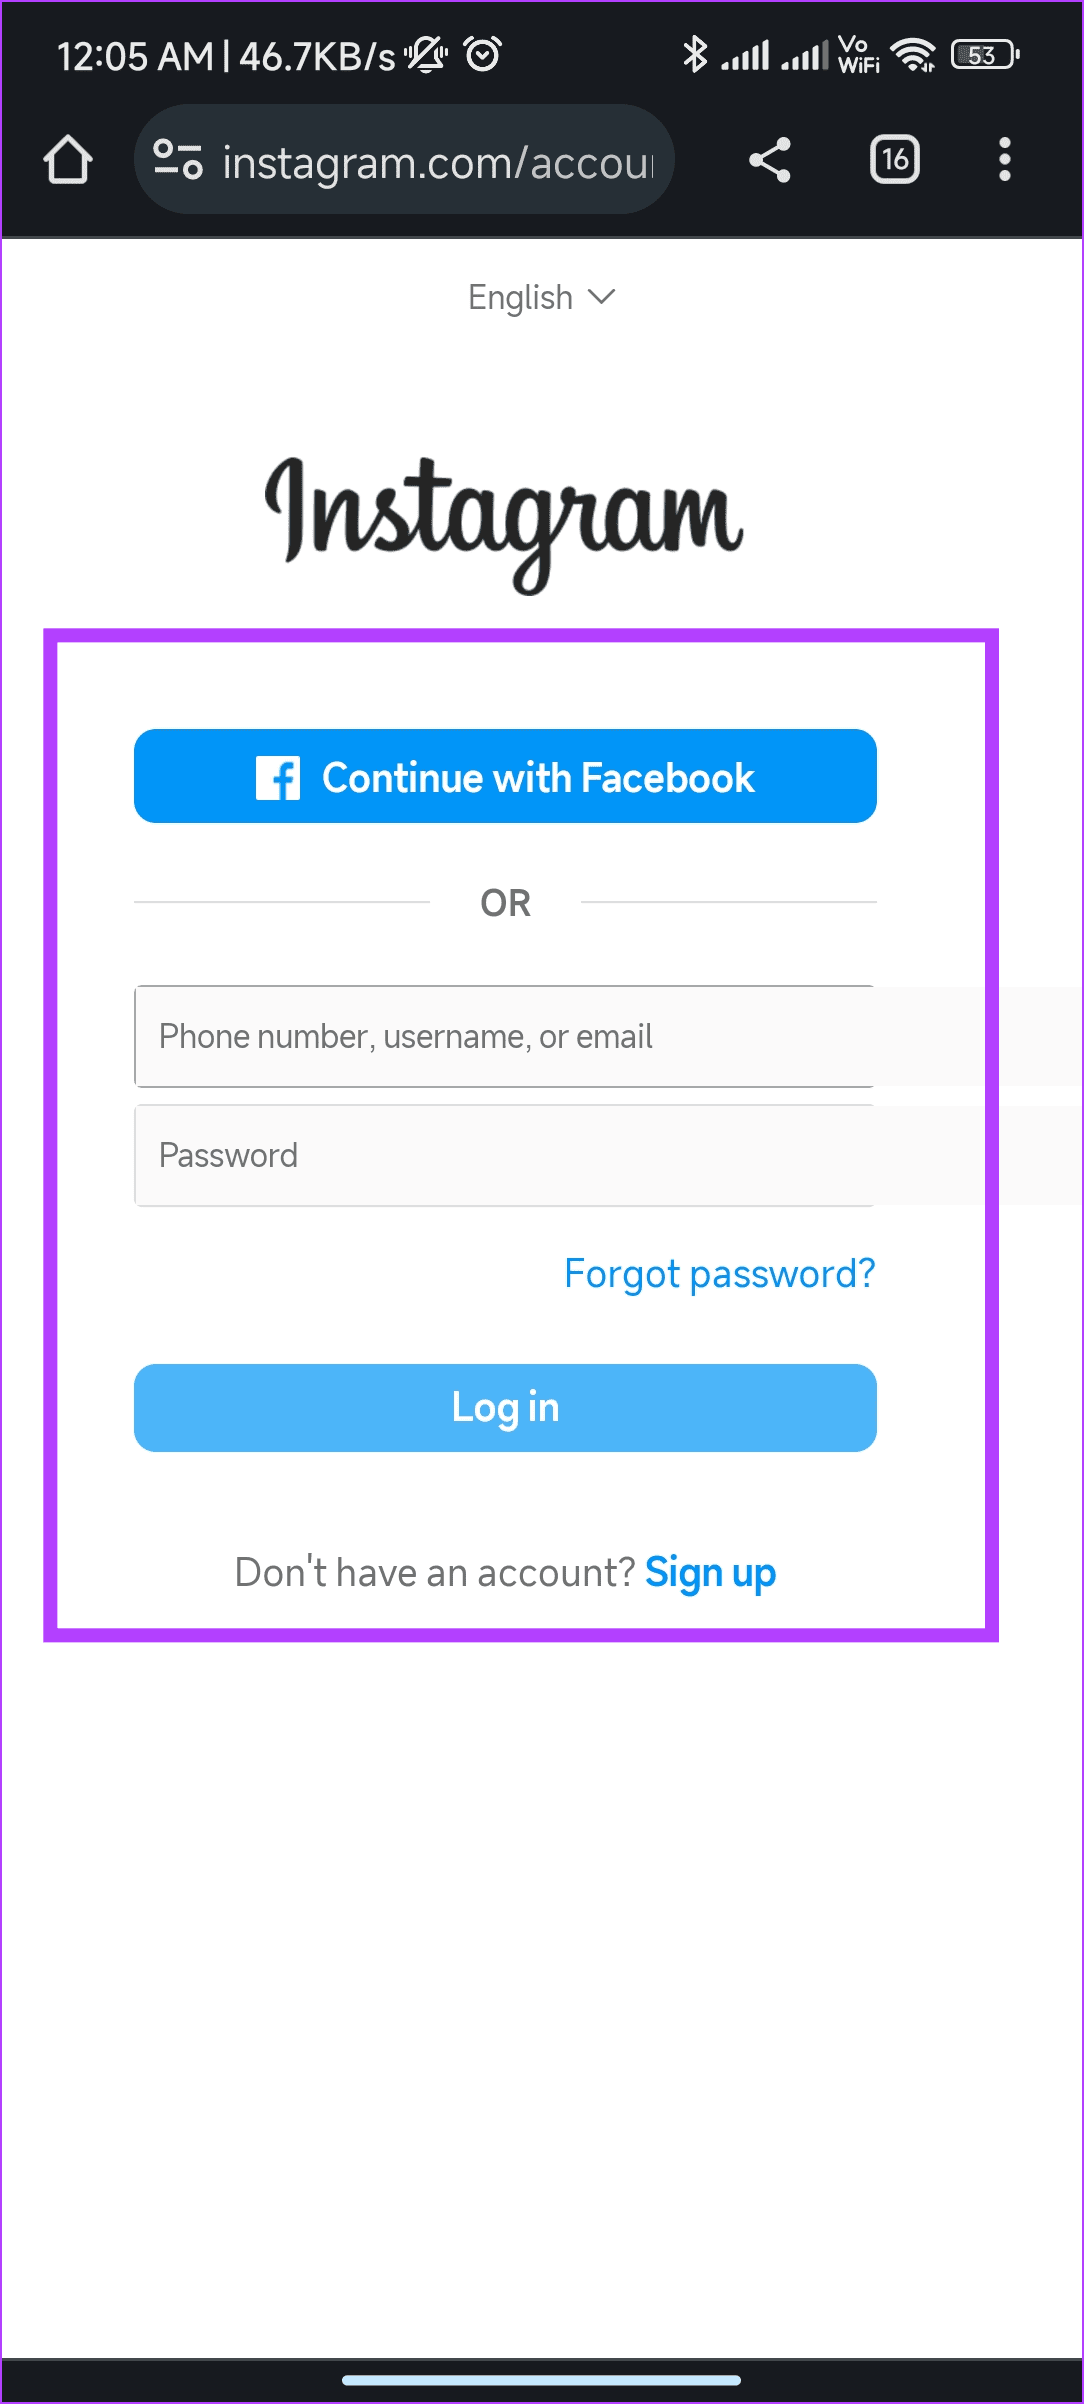 log in with your account